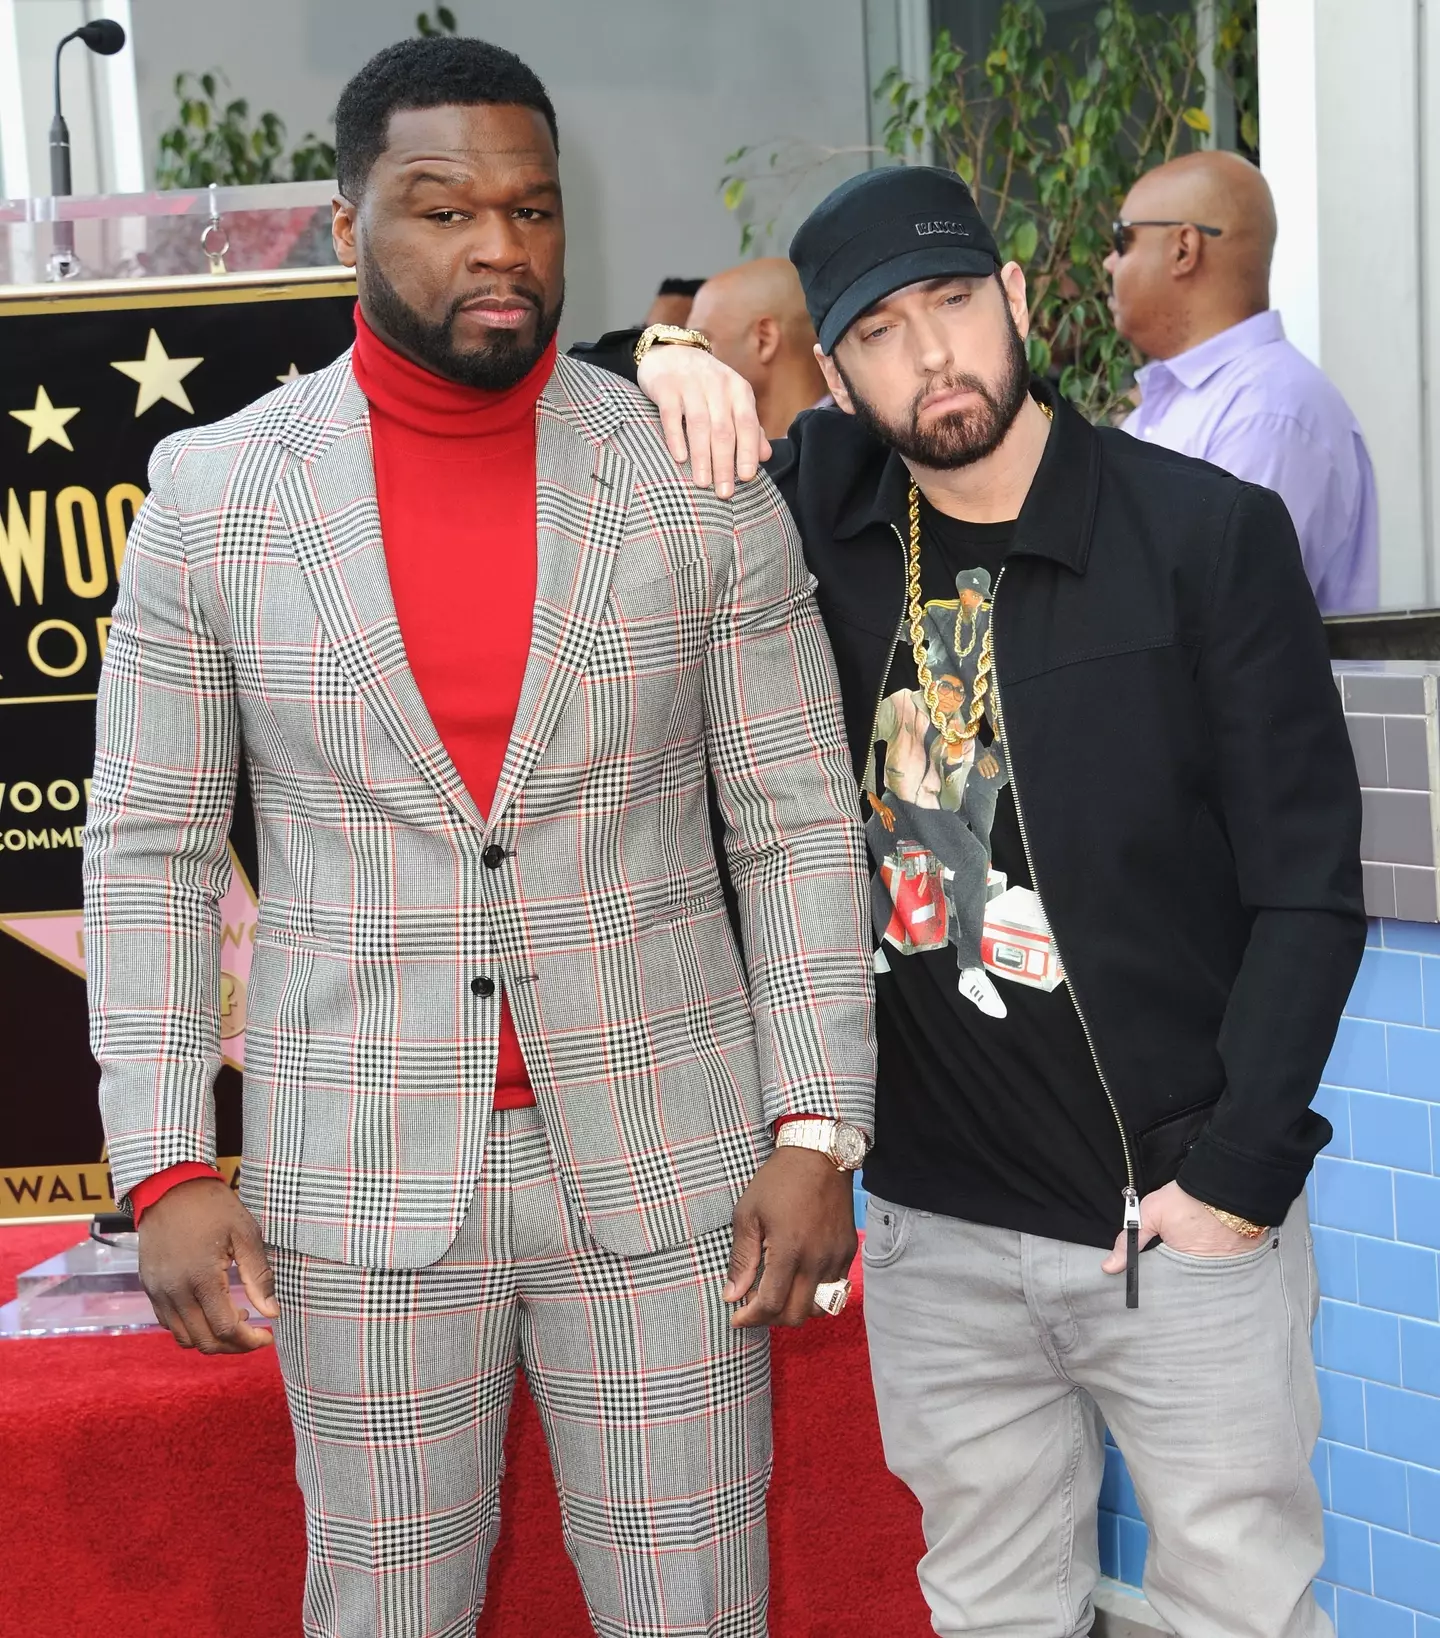 50 Cent and Eminem have been close pals since the 00s.